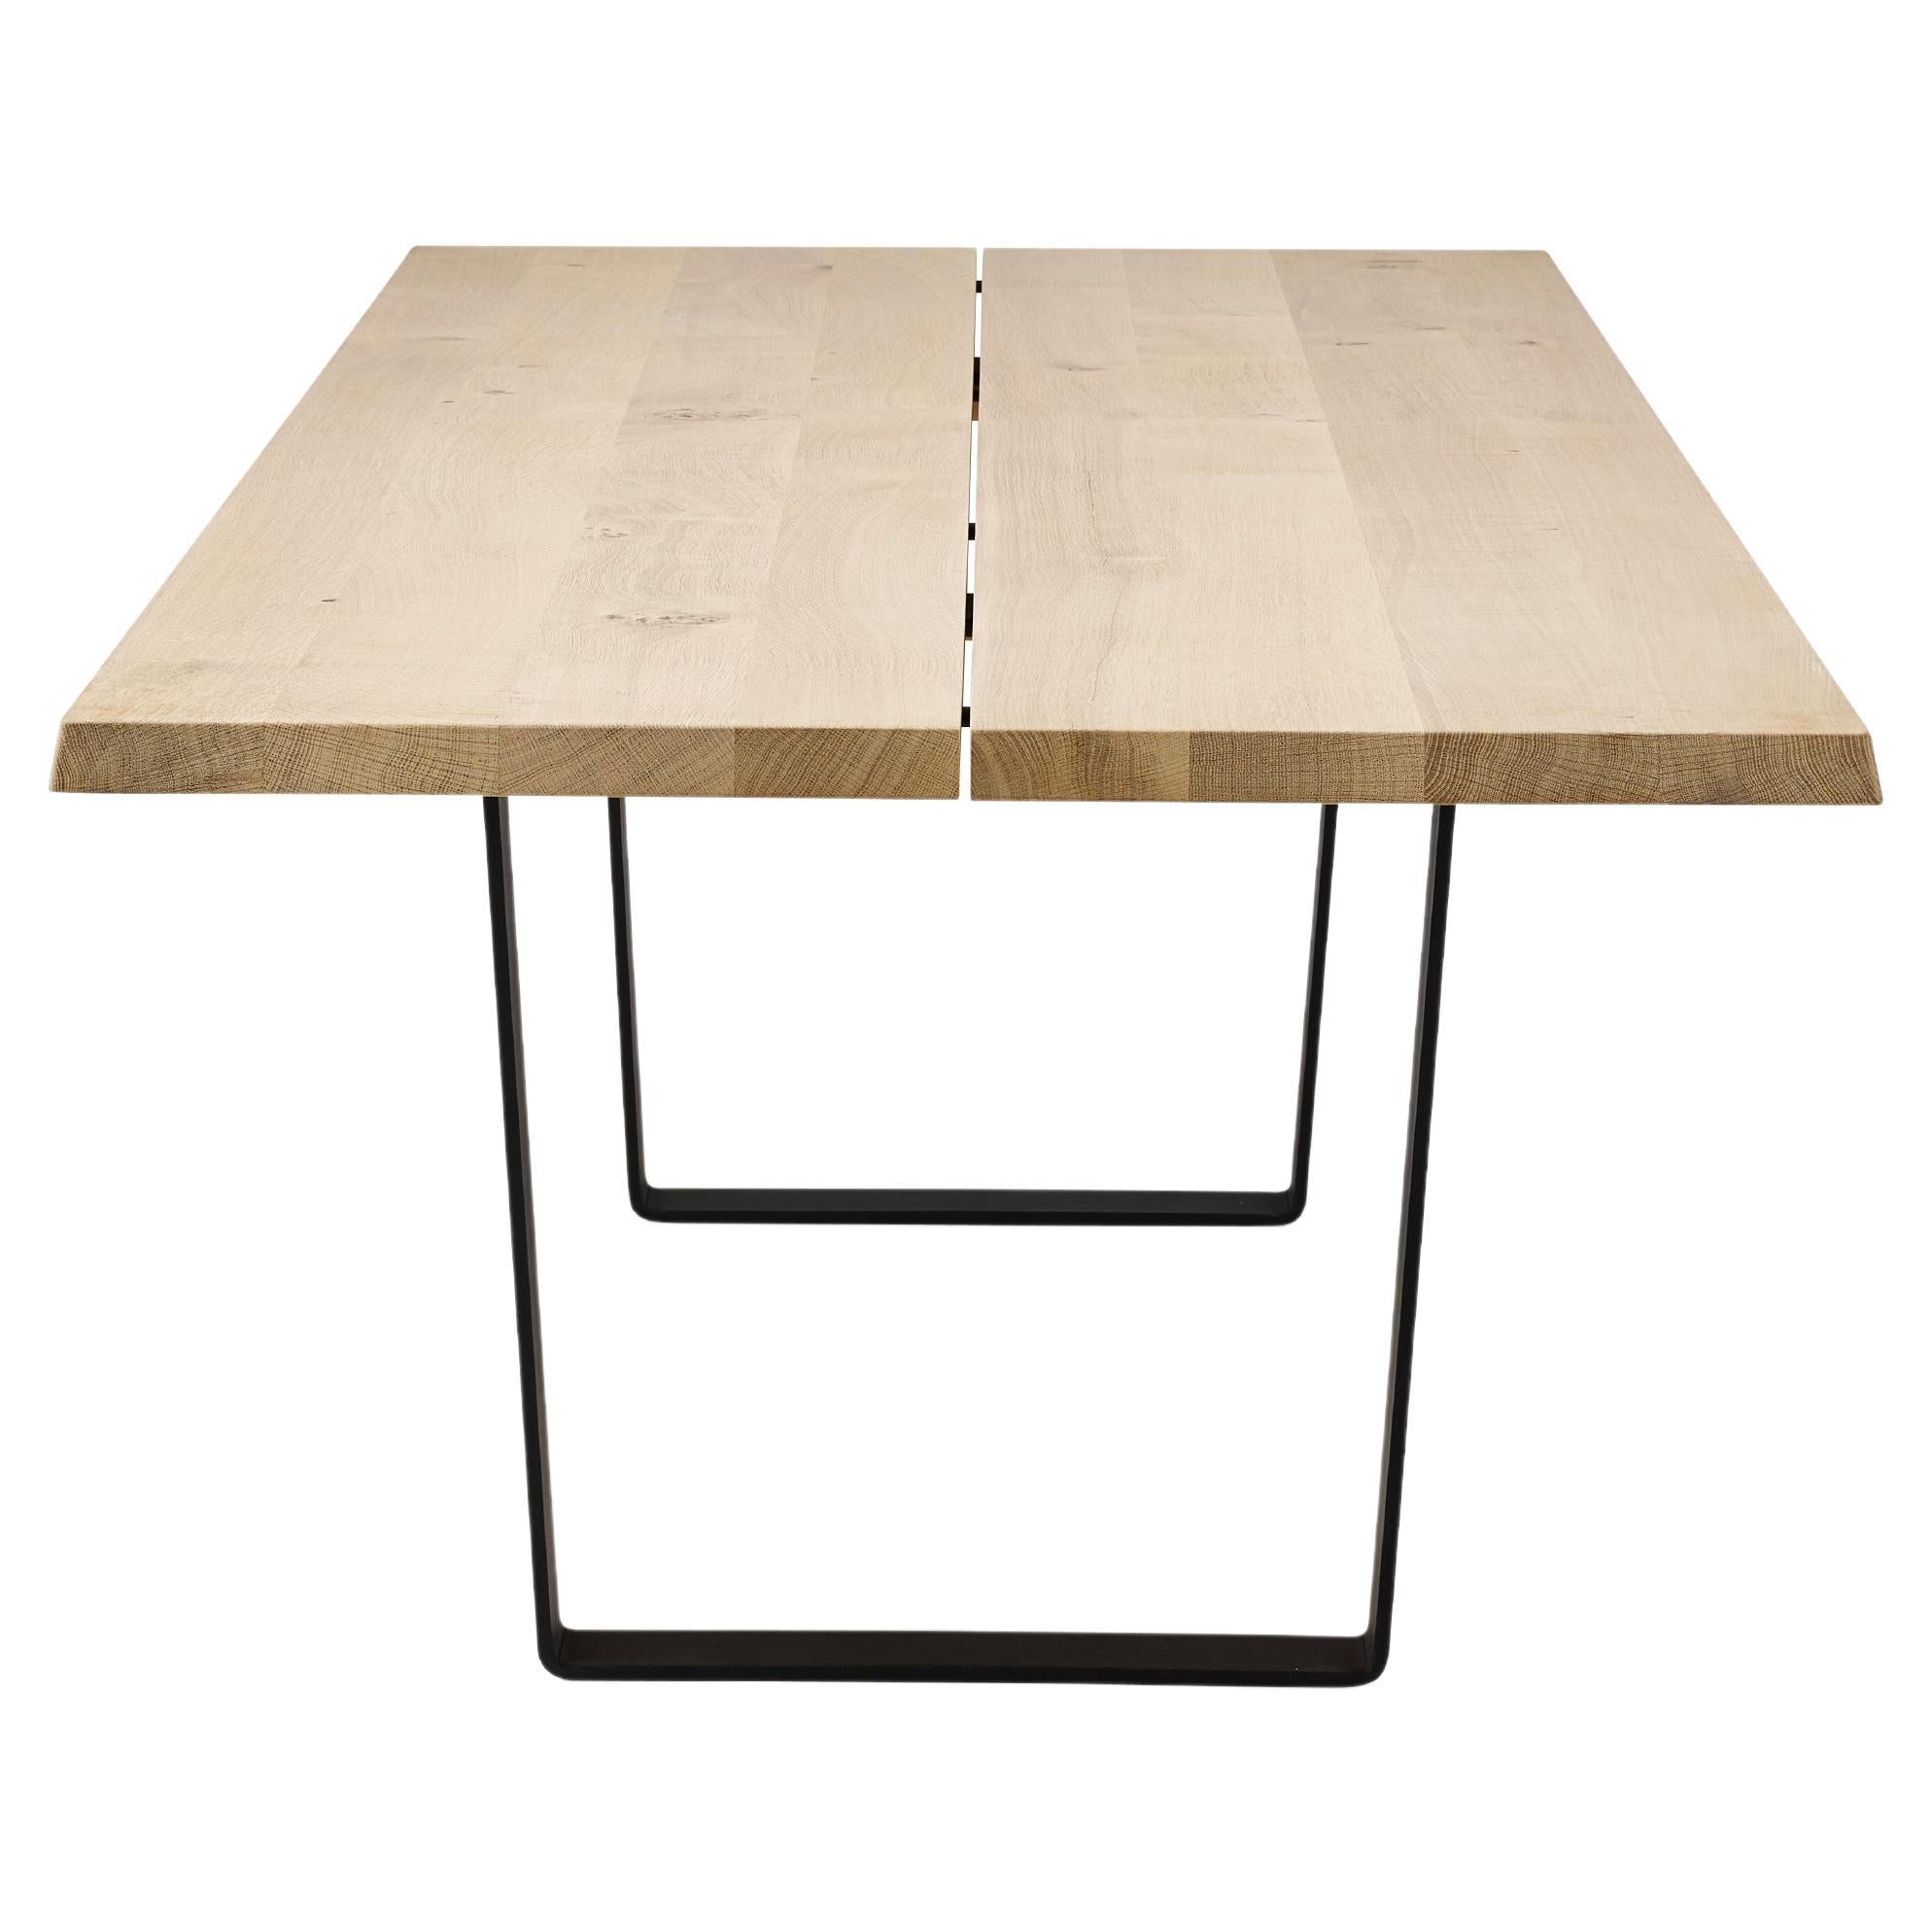 Lowlight dining table, rectangular, 200 cm.

Solid wood tabletop and black powder coated steel legs. 
Handmade in Denmark.

Measure: Height: 72 or 74 cm

Tabletop dimensions:
– 180 x 100 cm
– 200 x 100 cm
– 220 x 100 cm
– 240 x 100 cm
–